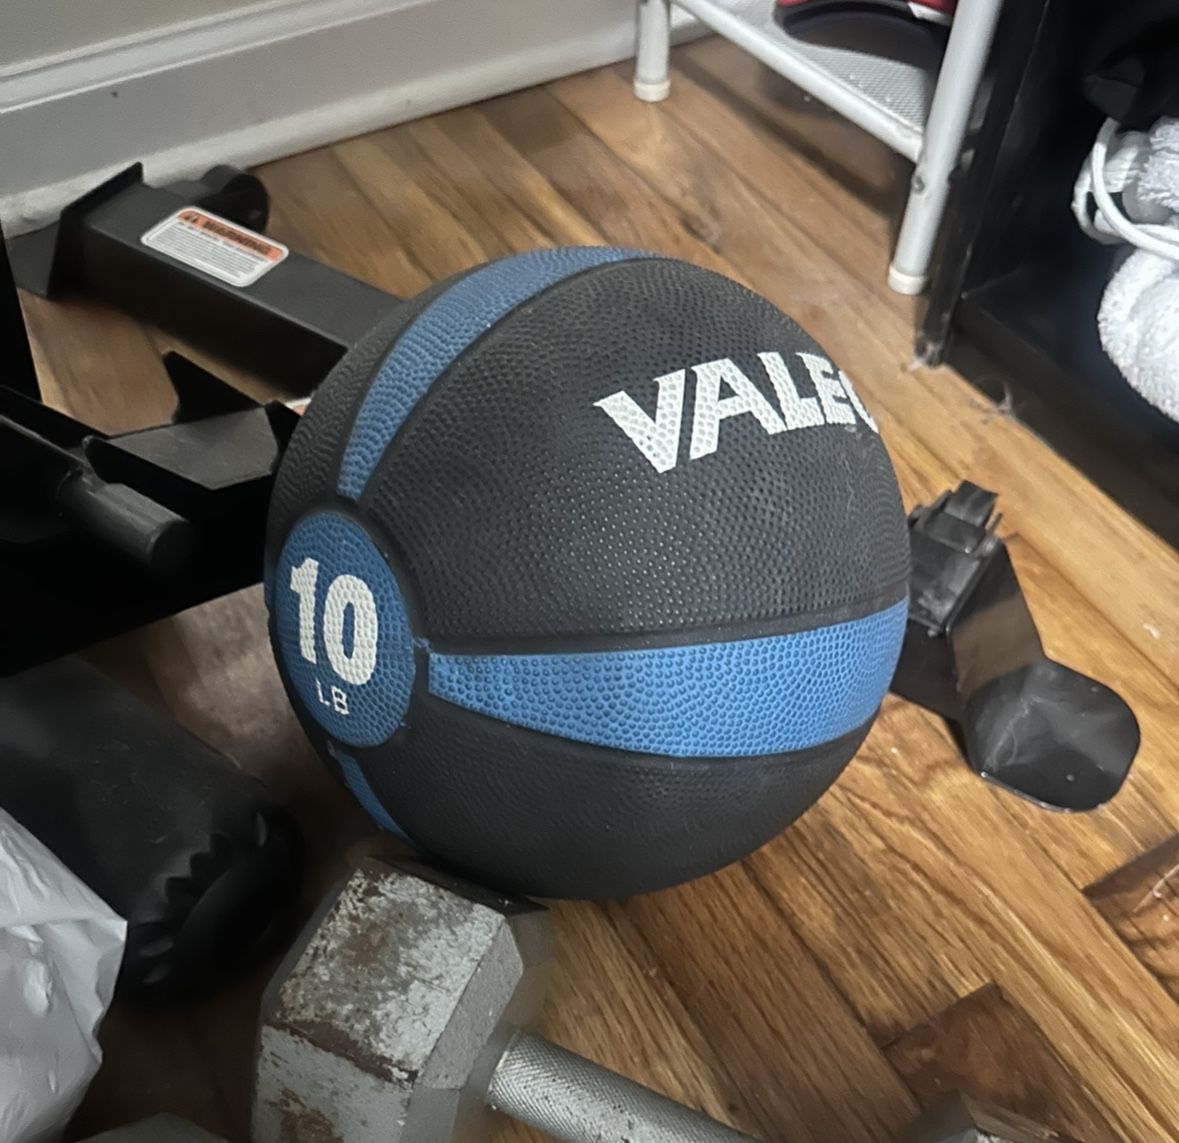 Weighted Medicine Ball (10 Lb)